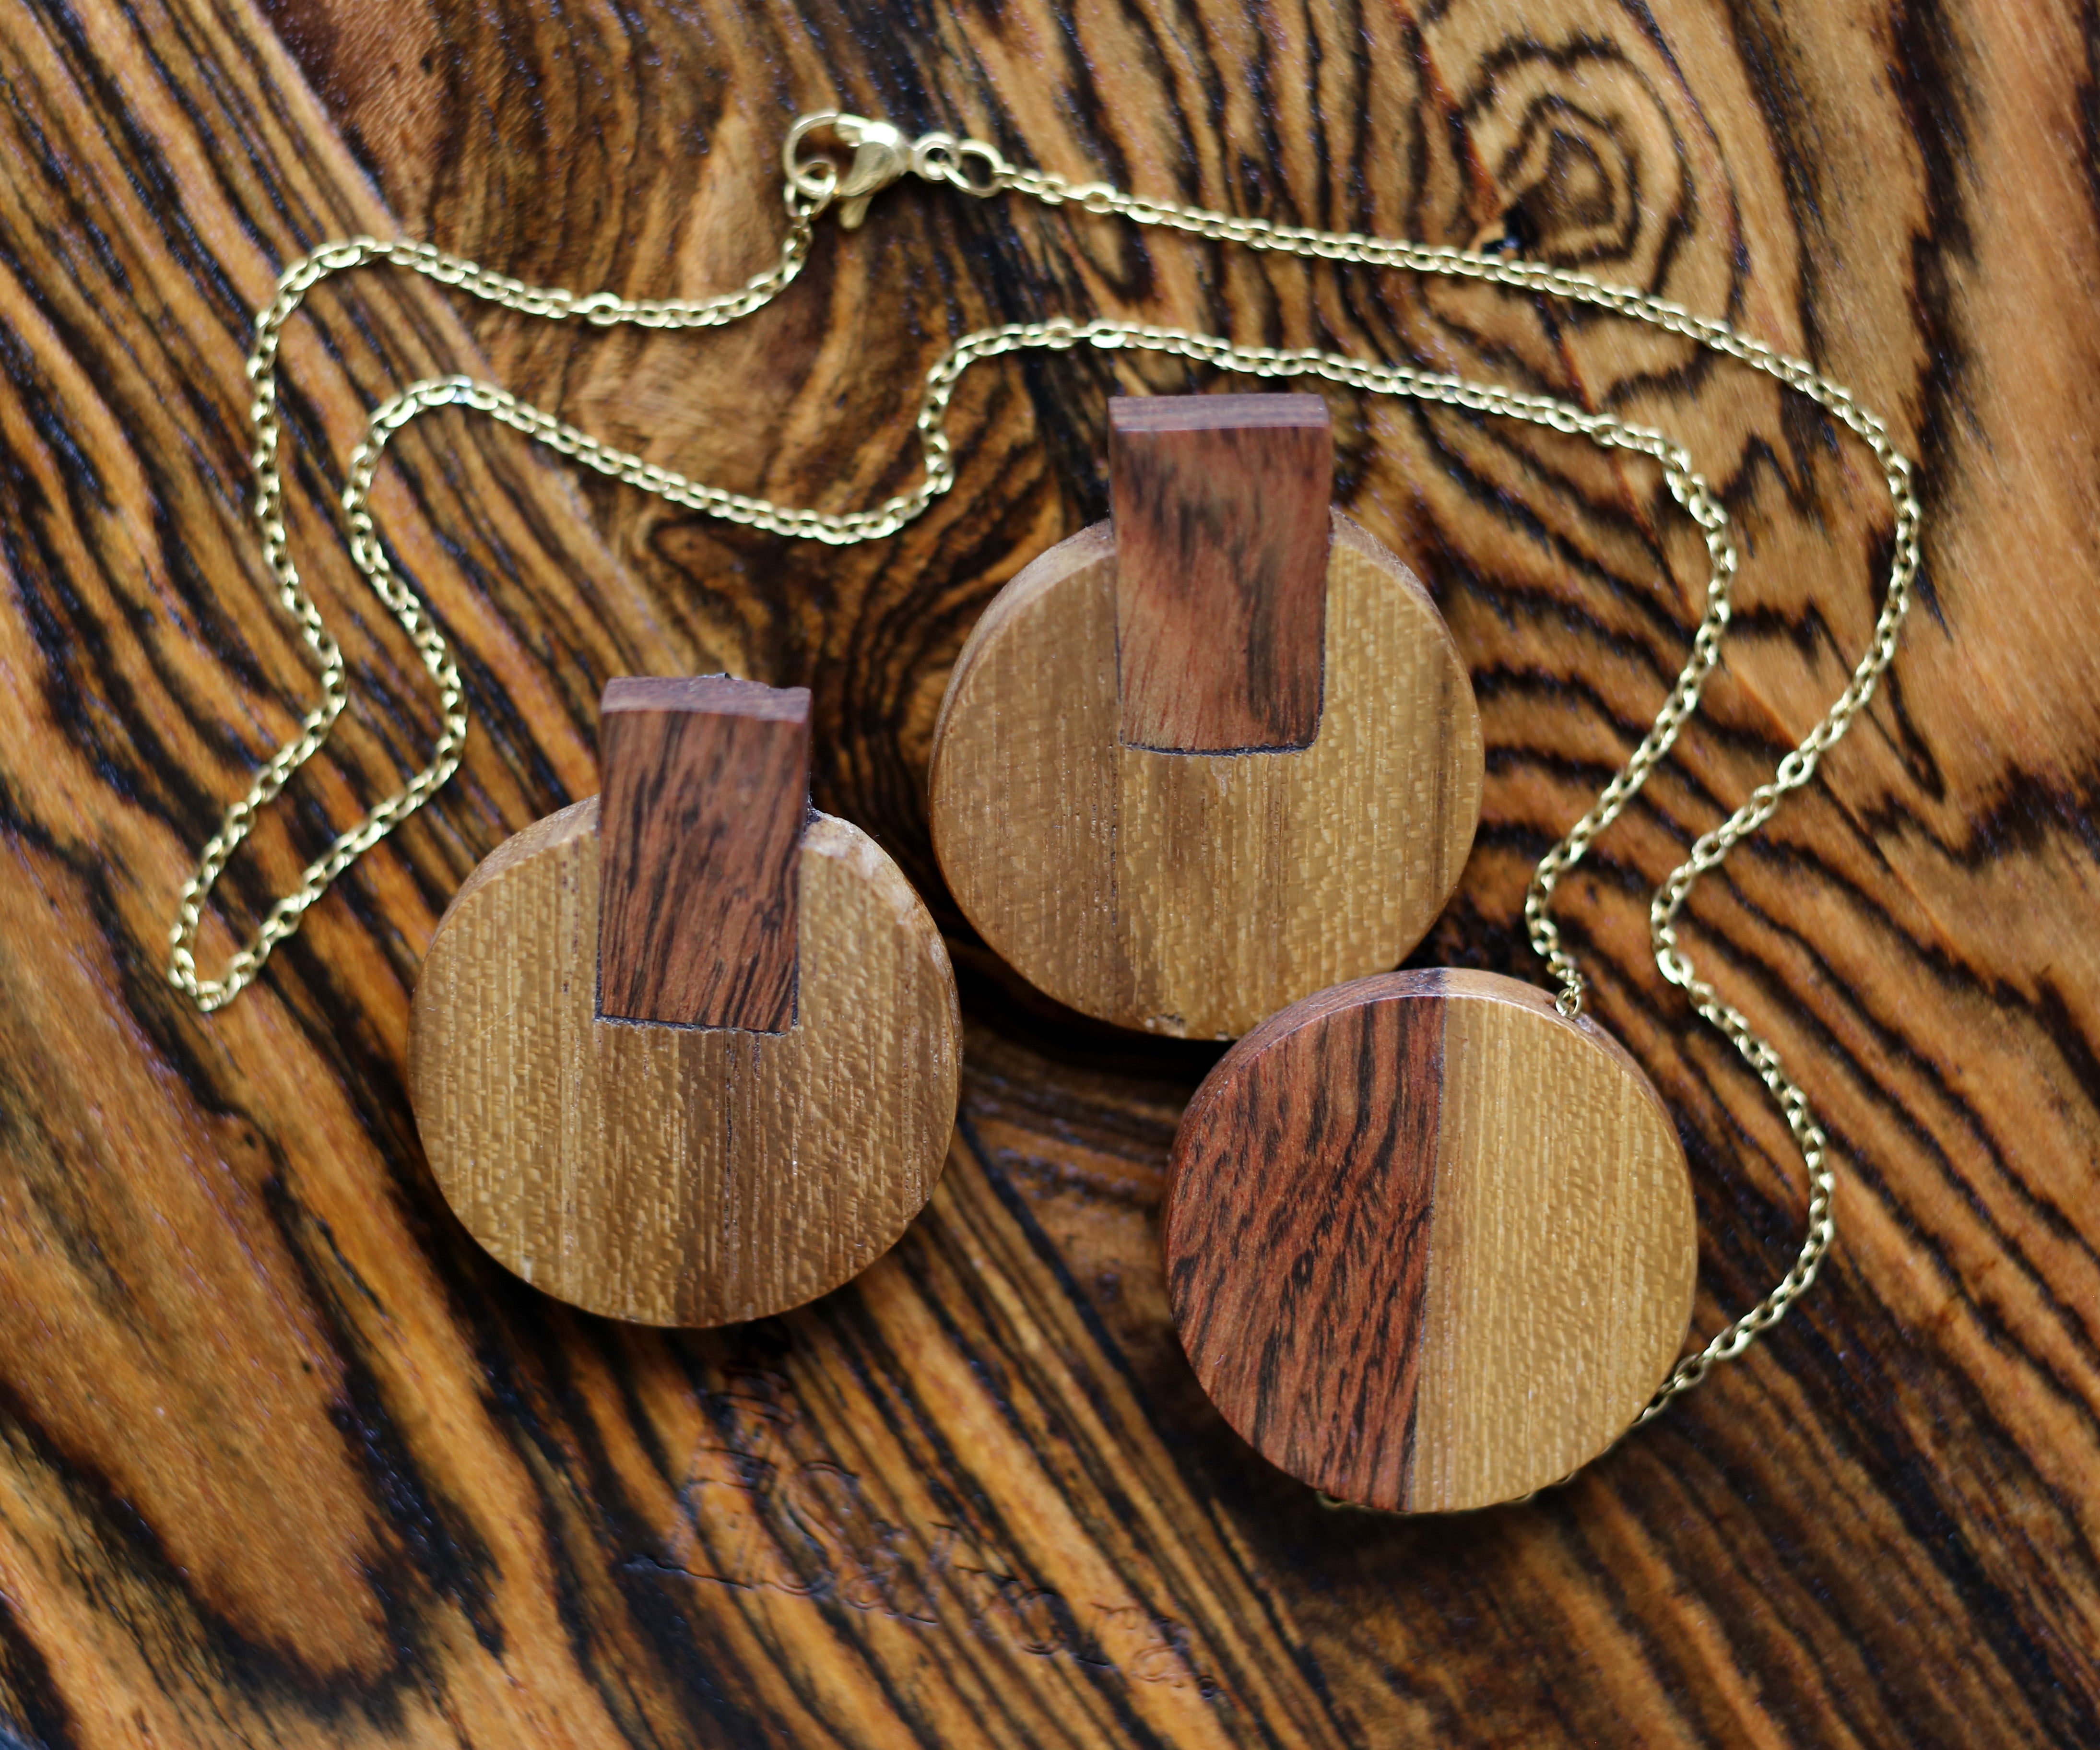 Ethnic stud earrings in wood jewelry set, Circle necklace set mayan earrings in exotic woods, golden surgical steel and hypoallergenic studs